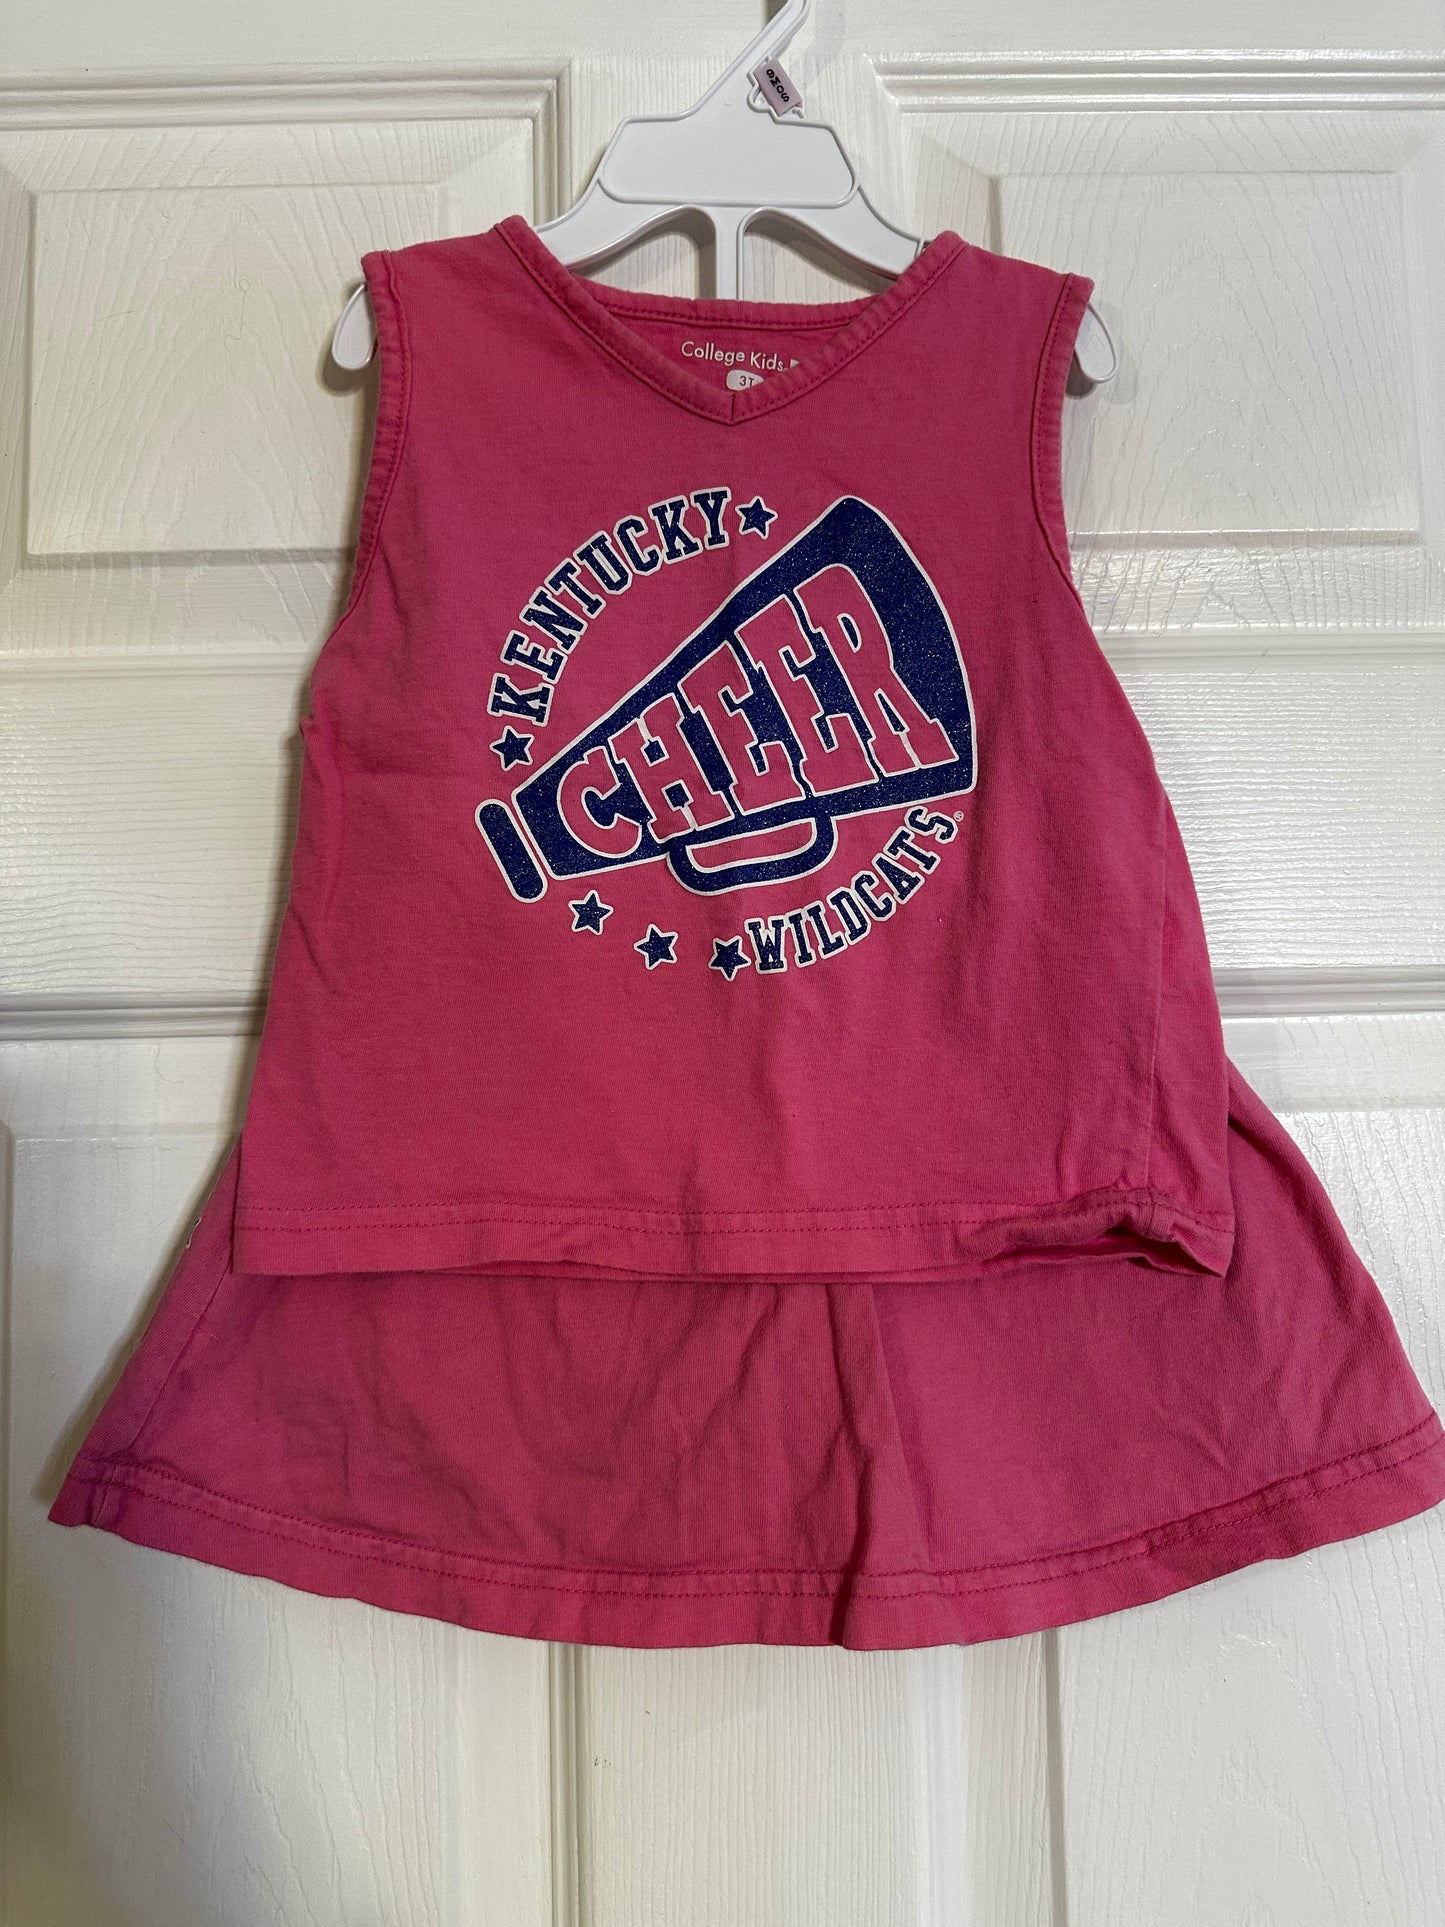 *REDUCED* 2T Girl's UK Cheer Outfit